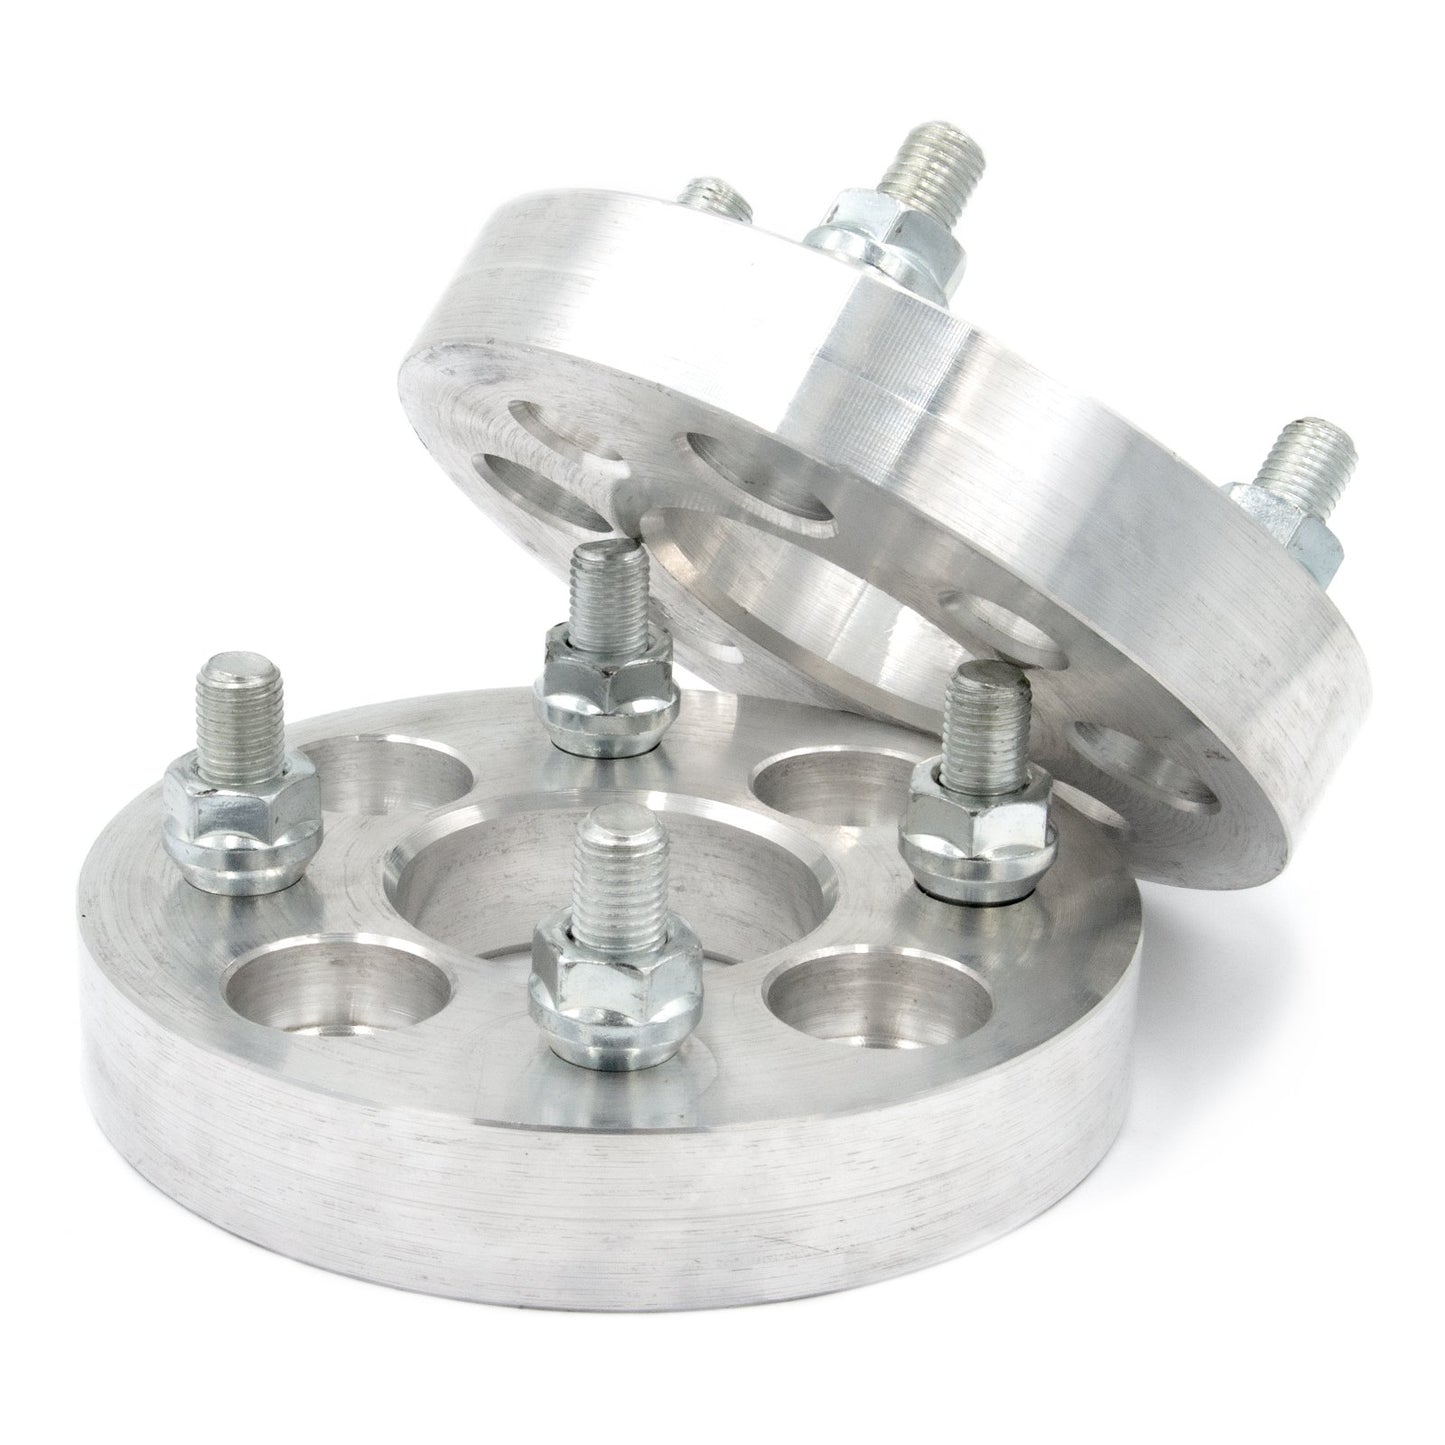 4x156 to 4x110 Wheel Spacer/Adapter - Thickness: 3/4"- 4"